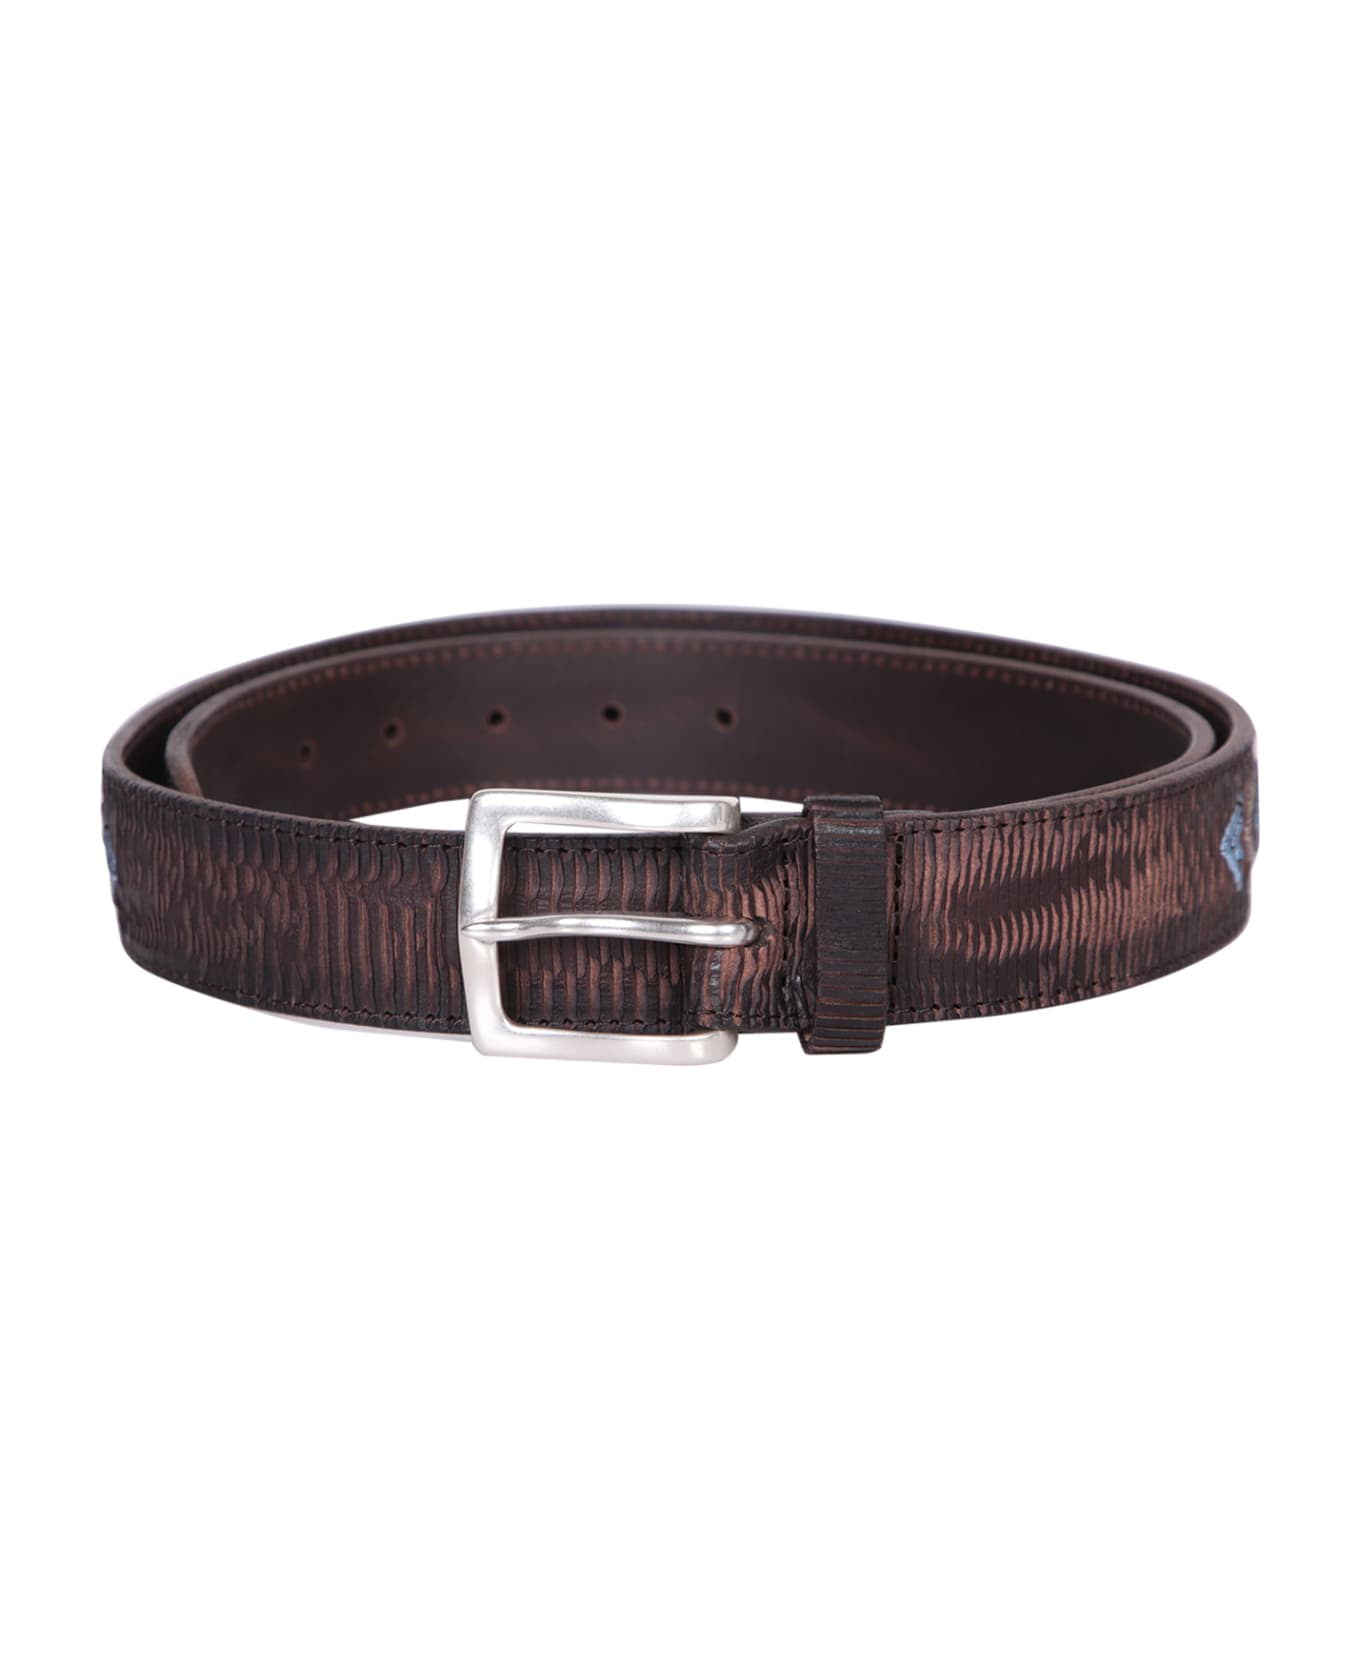 Orciani Multicolor Embroidered Brown Belt - Brown